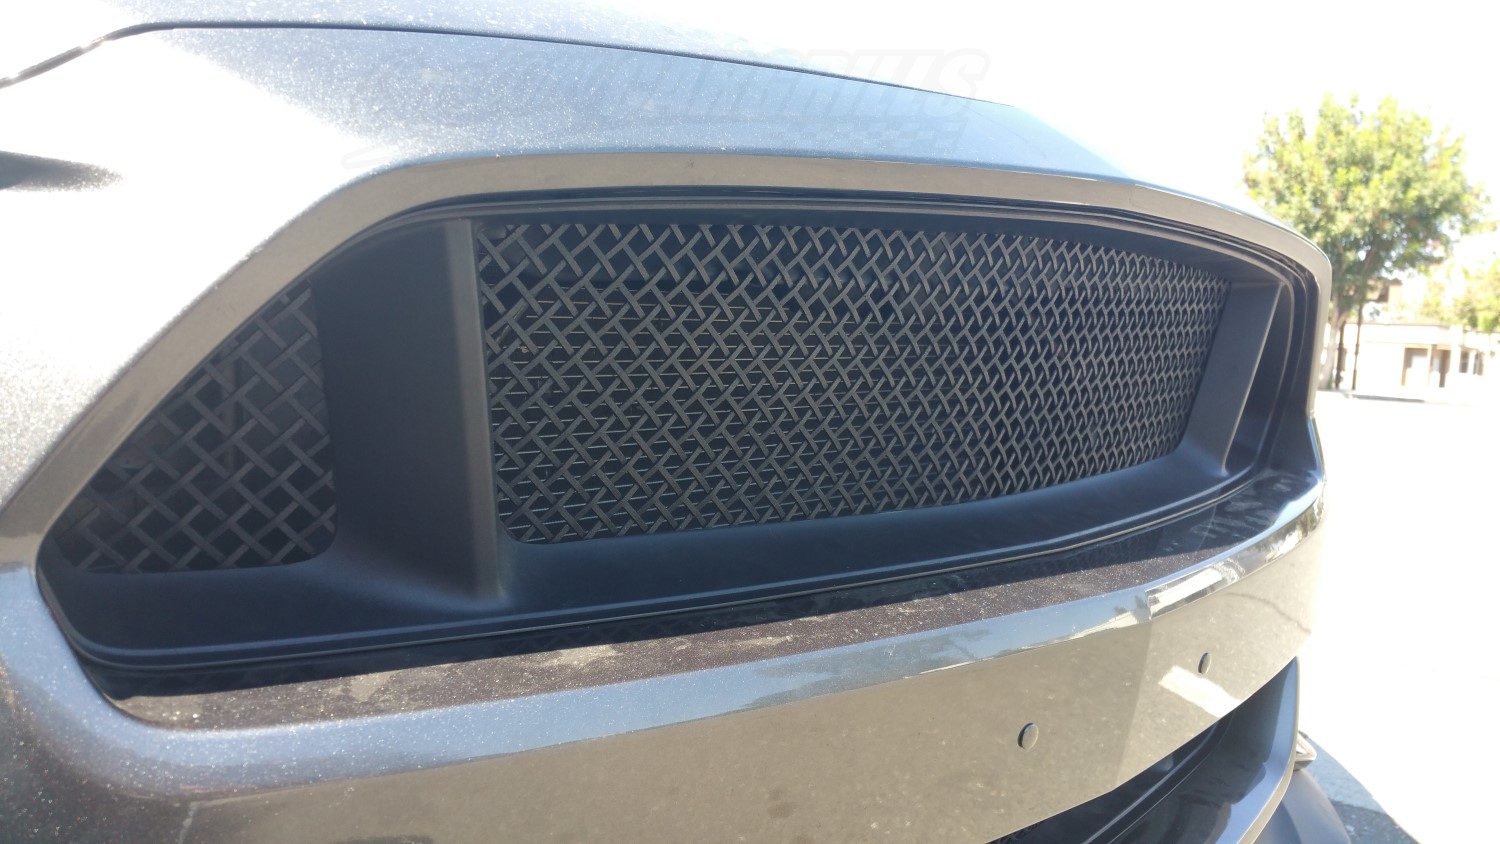 Woven Mesh Grill Kit for 2015 - 2017 Ford Mustang GT #2